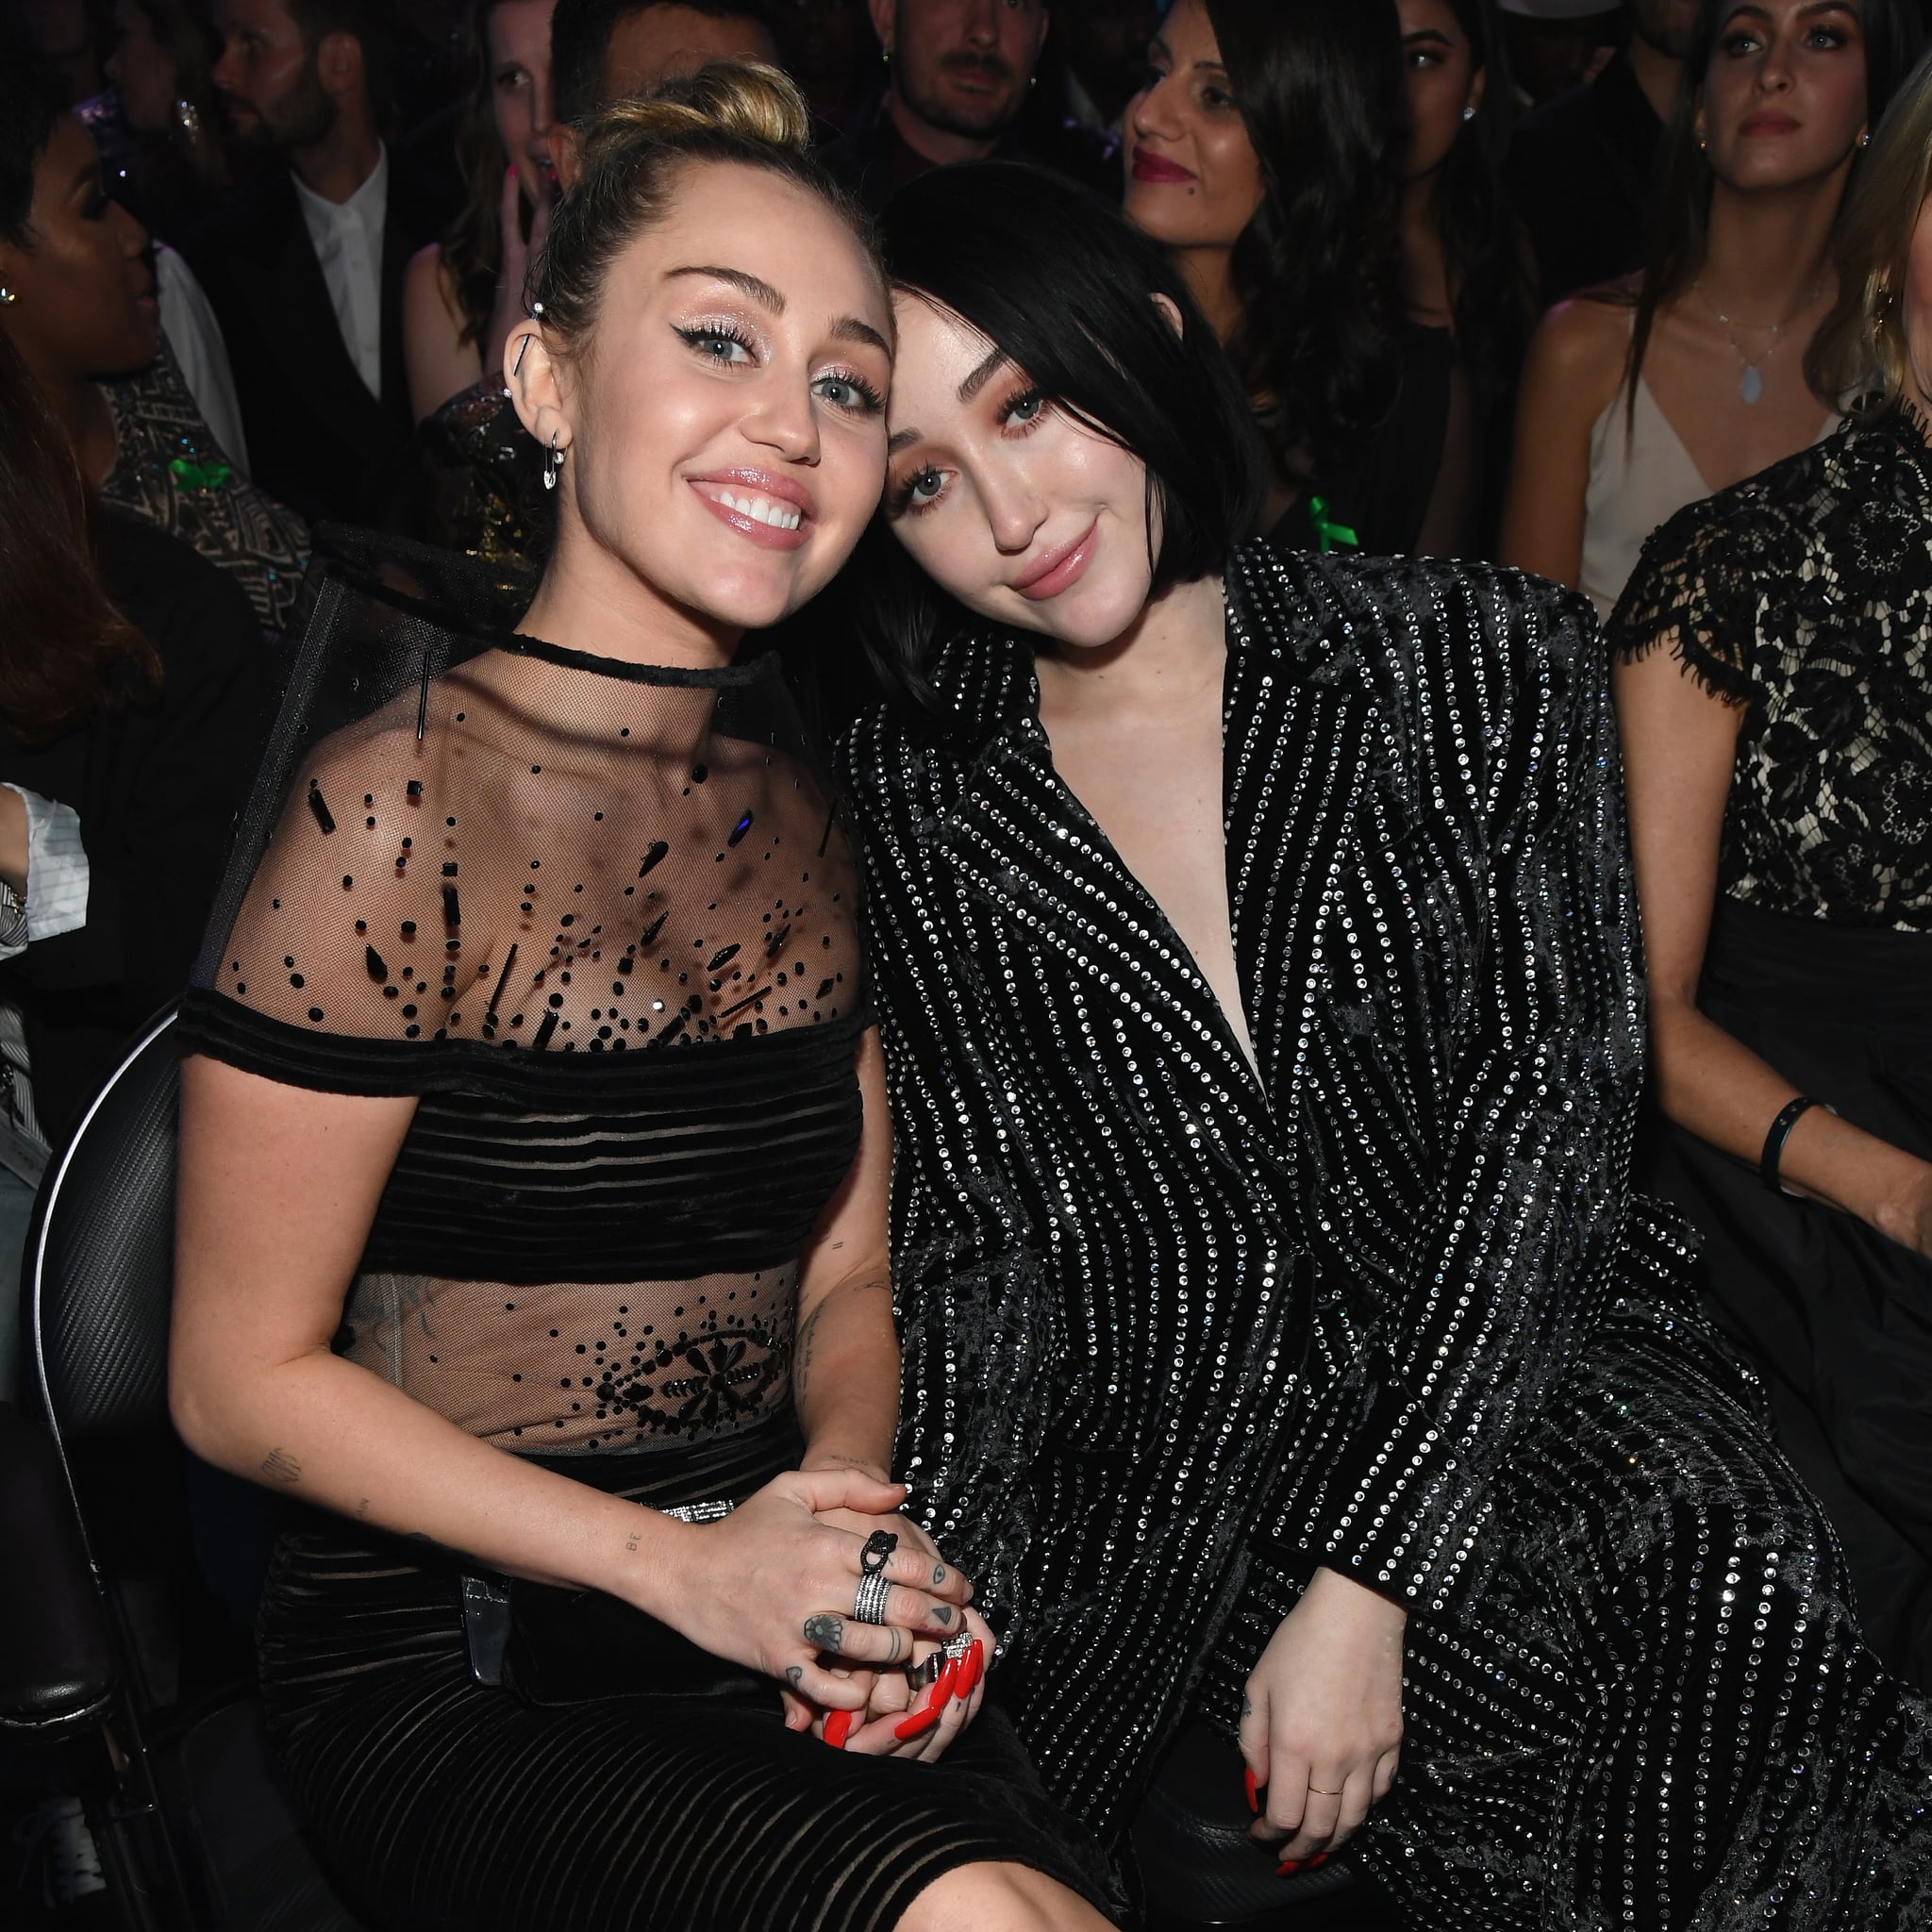 LOS ANGELES, CA - FEBRUARY 10:  Miley Cyrus (L) and Noah Cyrus pose during the 61st Annual GRAMMY Awards at Staples Centre on February 10, 2019 in Los Angeles, California.  (Photo by Kevin Mazur/Getty Images for The Recording Academy)